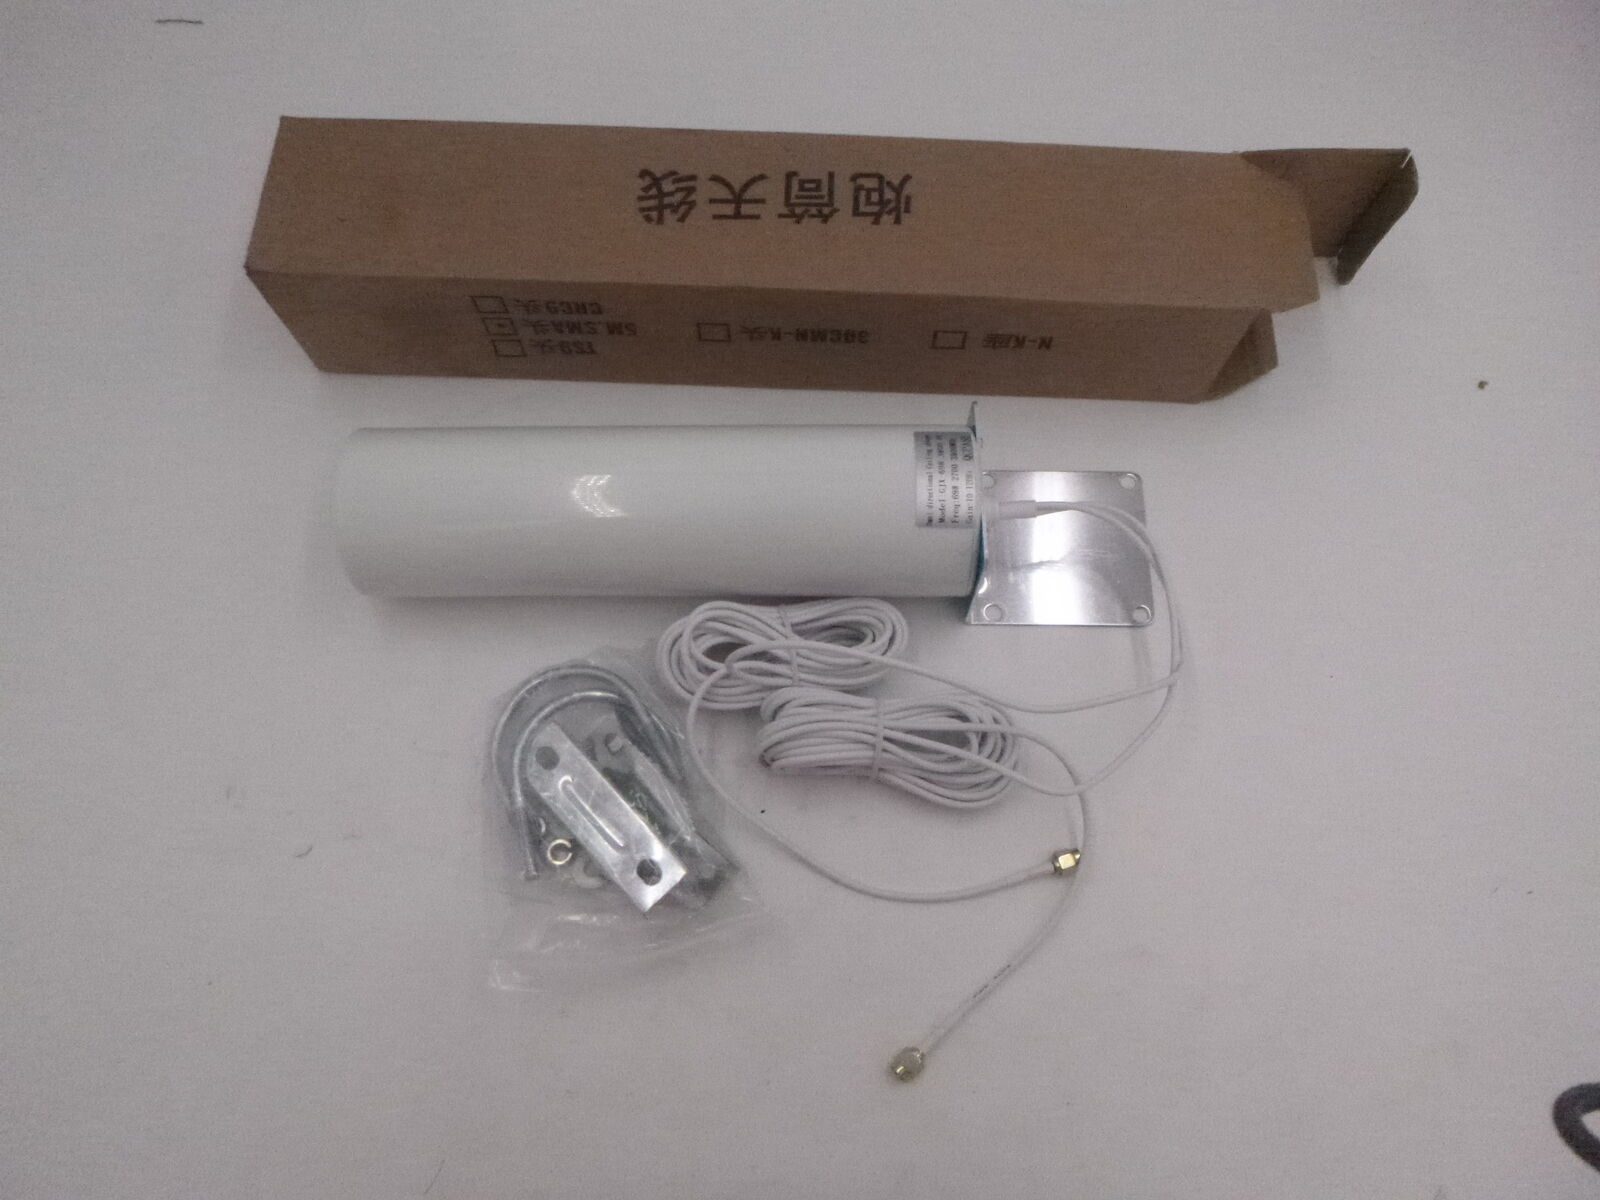 Omni-Directional Ceiling/Pole/Wall Mount Antenna 698-2700-3800MHZ